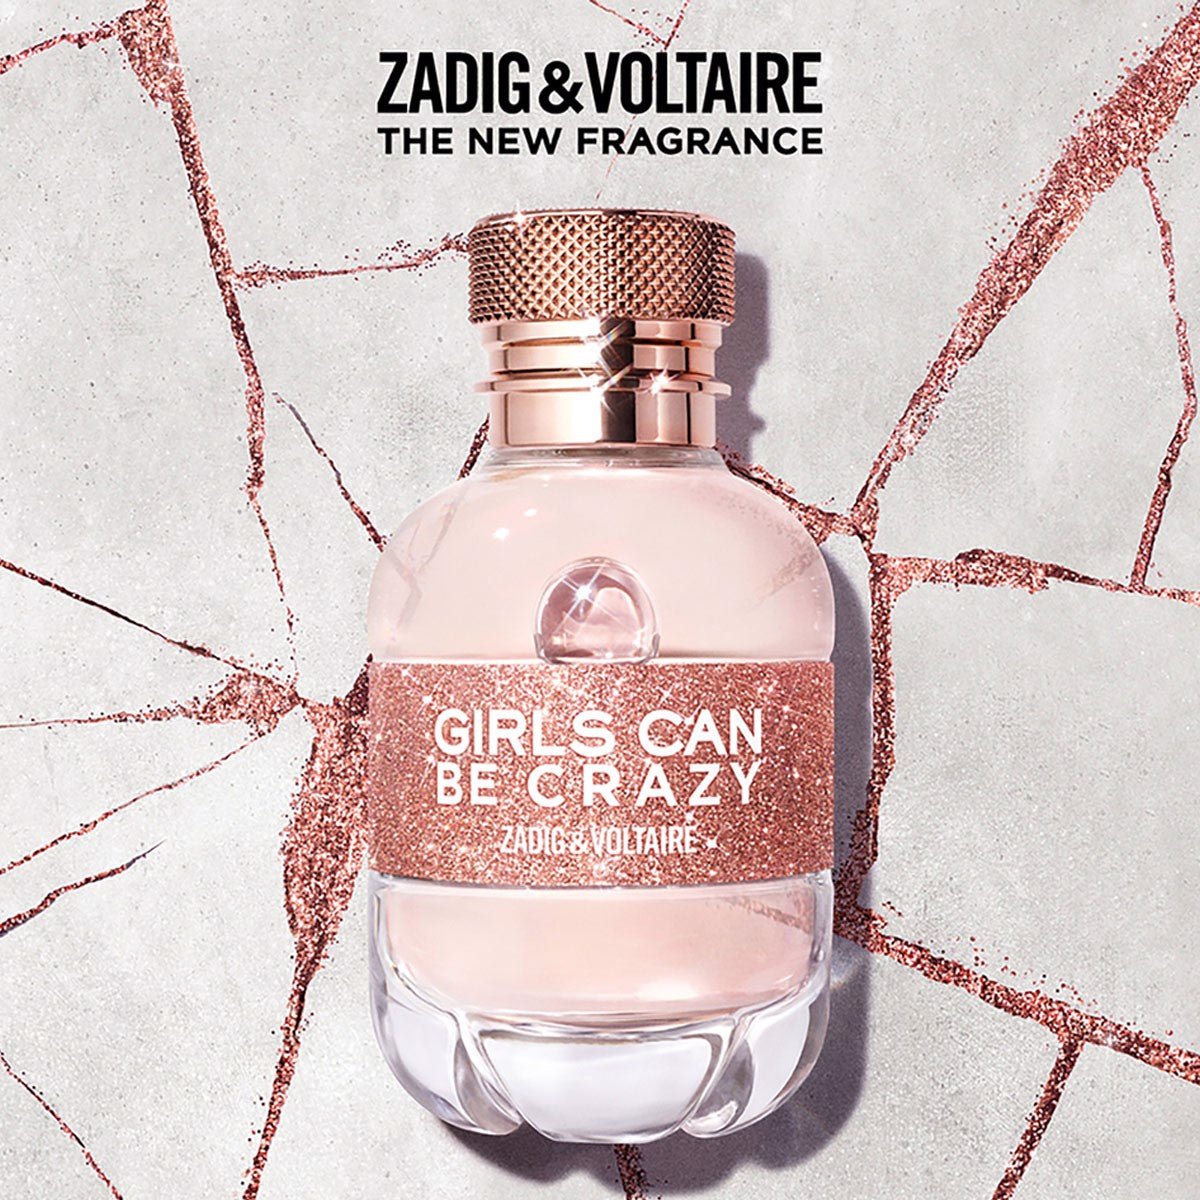 Zadig & Voltaire Girls Can Be Crazy EDP | My Perfume Shop Australia